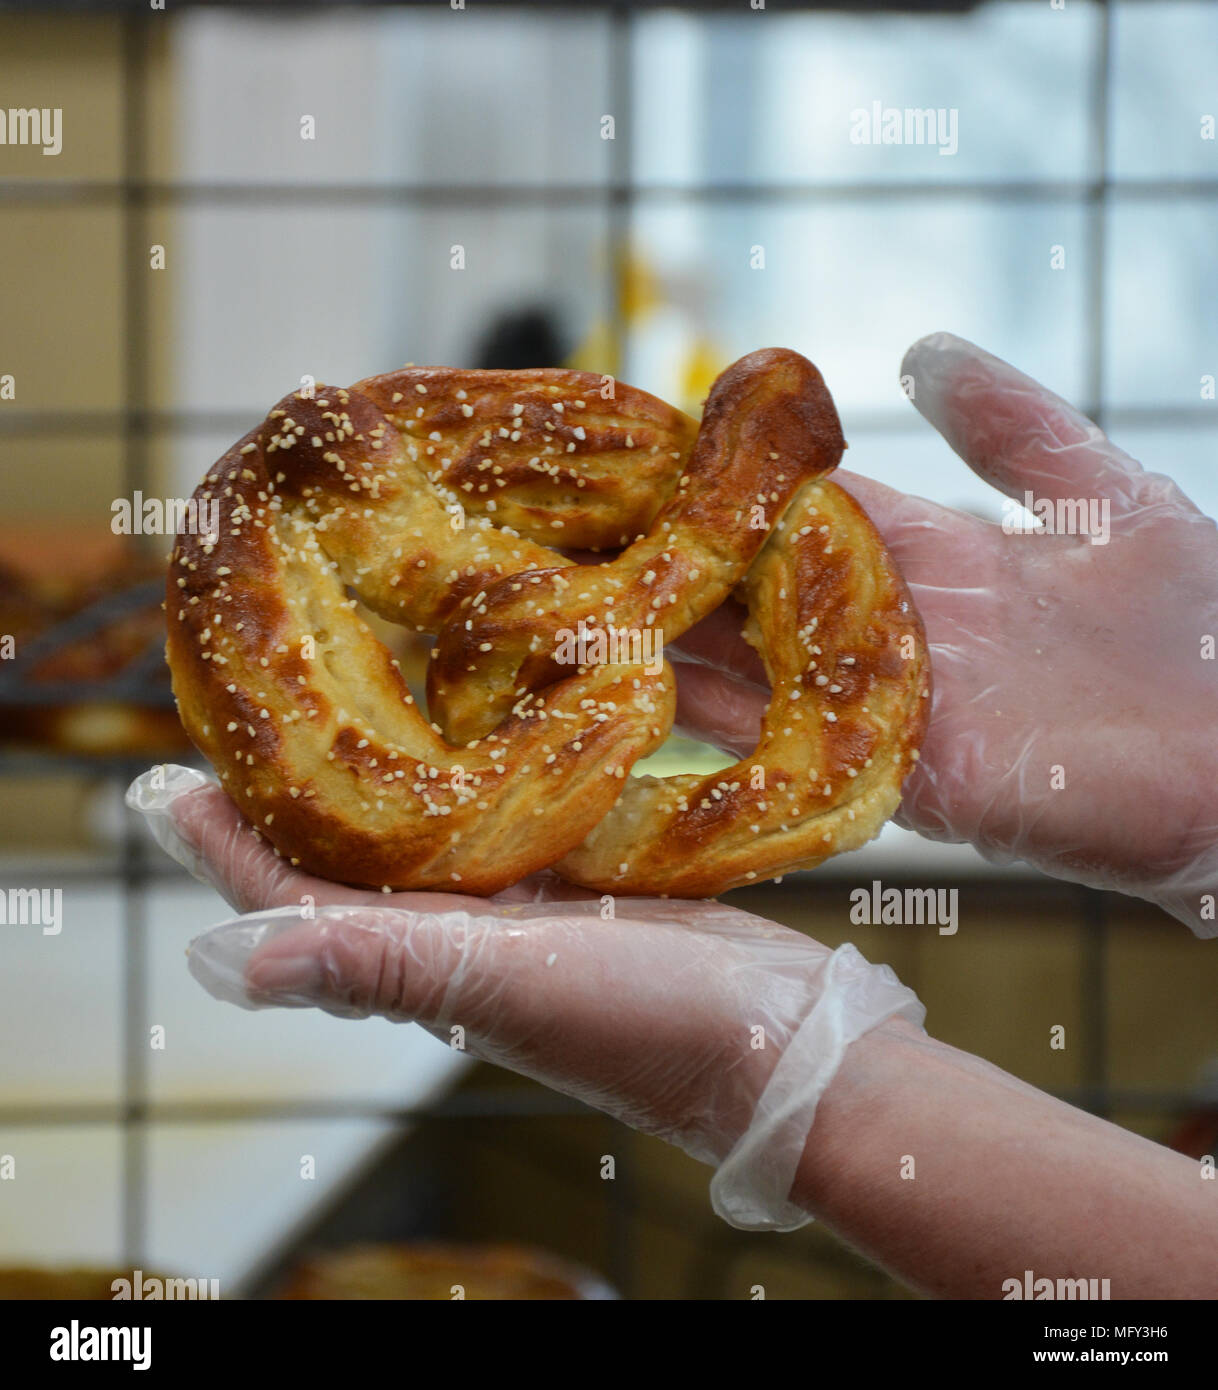 Making hand made custom Beer Pretzels, using Craft Beer as part of the ingredients,at the Breaker Brewing Company, Wilkes Barre Township PA. Cheers! Stock Photo